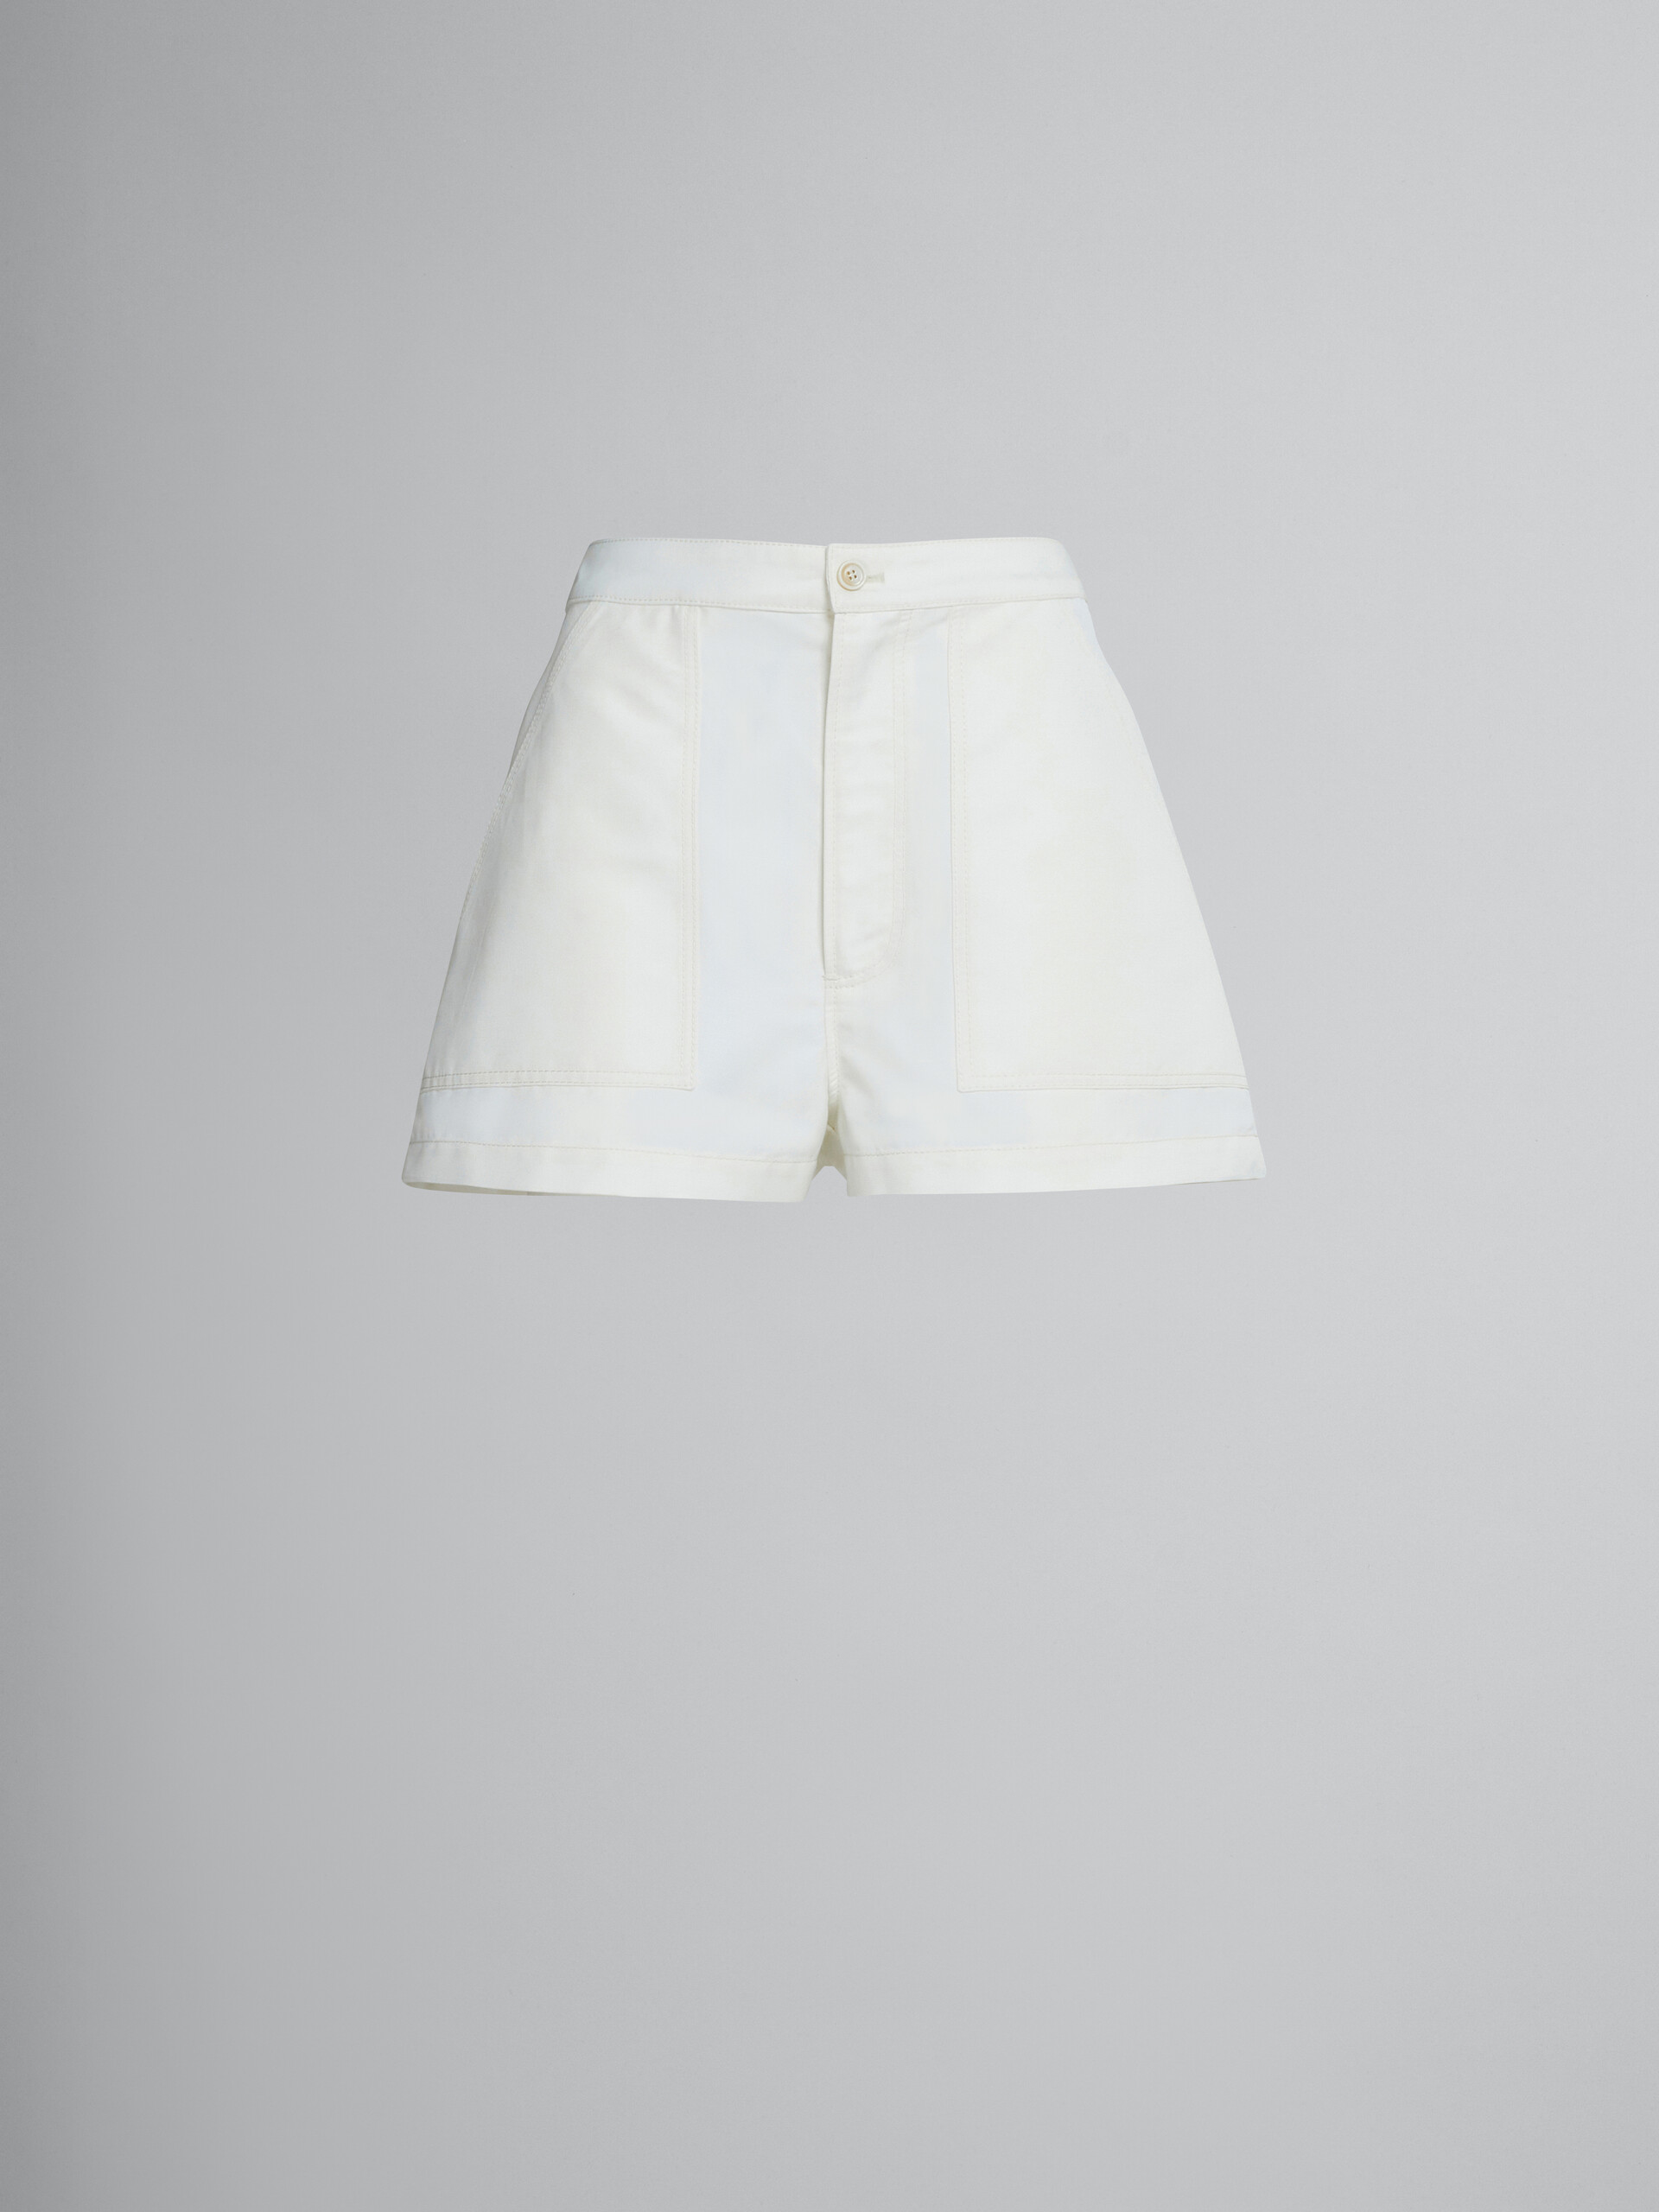 White shorts in technical cotton-linen - Pants - Image 1